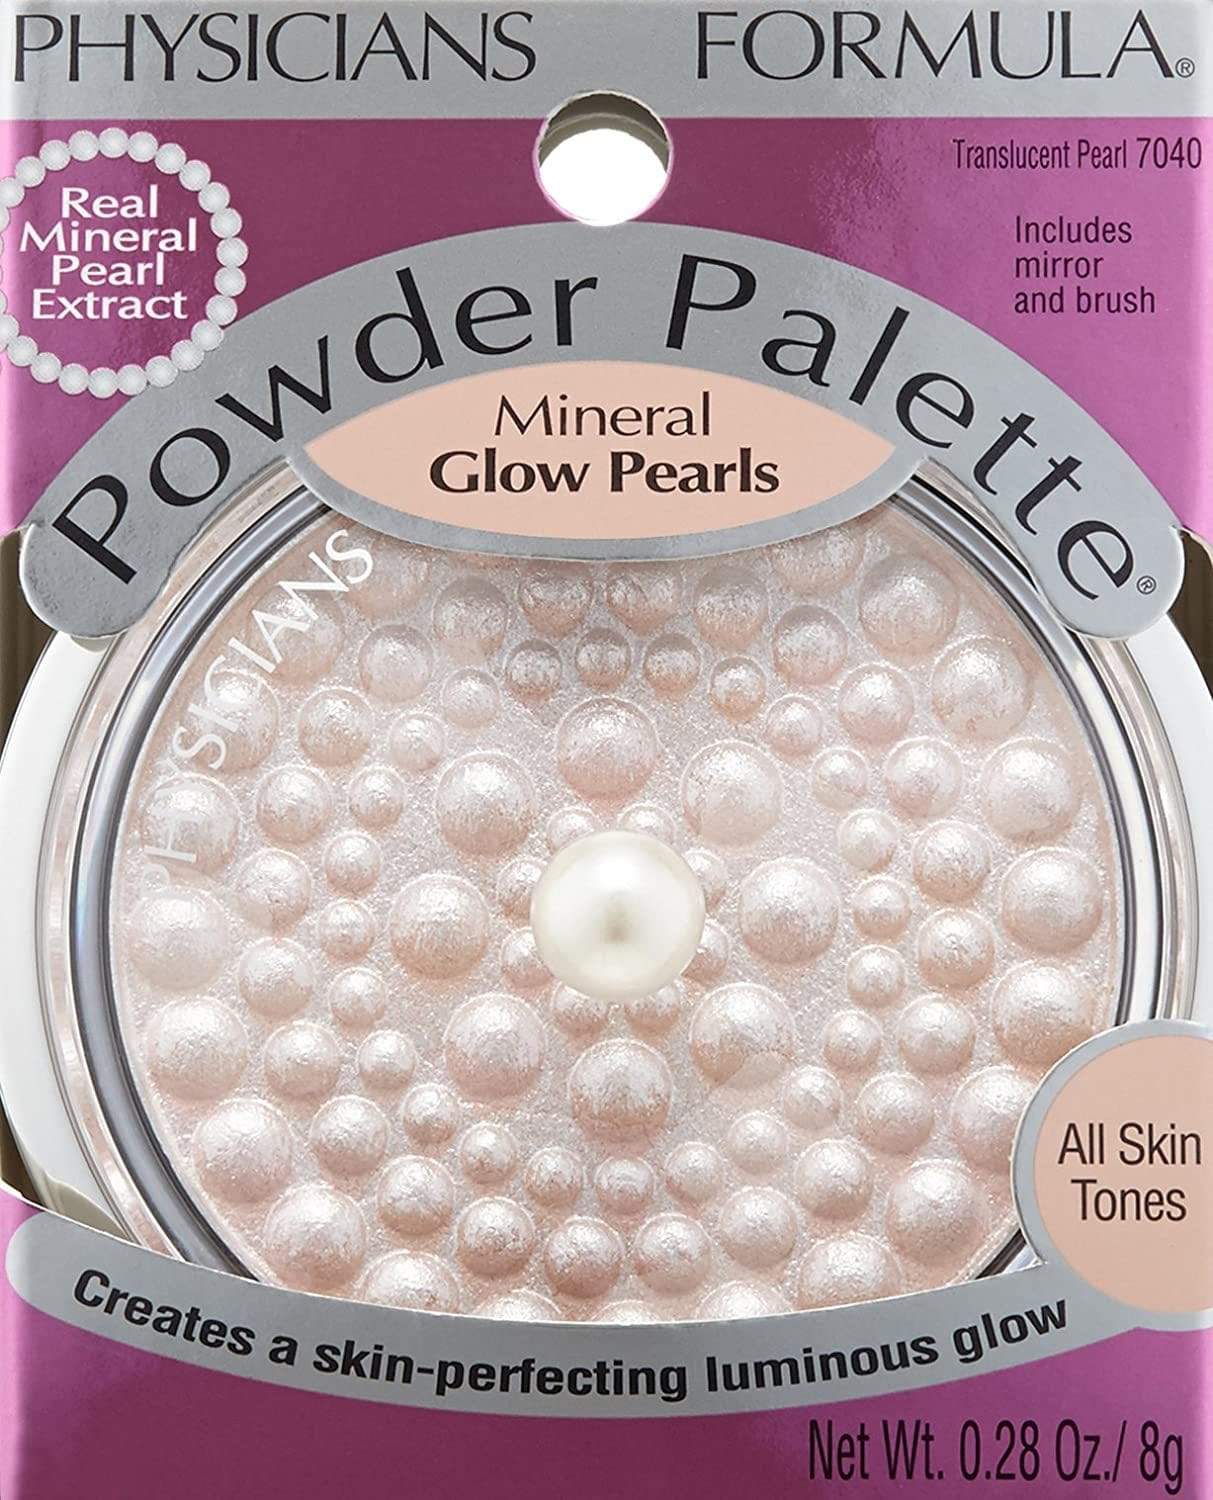 PHYSICIANS FORMULA Powder Palette Mineral Glow Pearls, Translucent Pearl, highlighter, London Loves Beauty